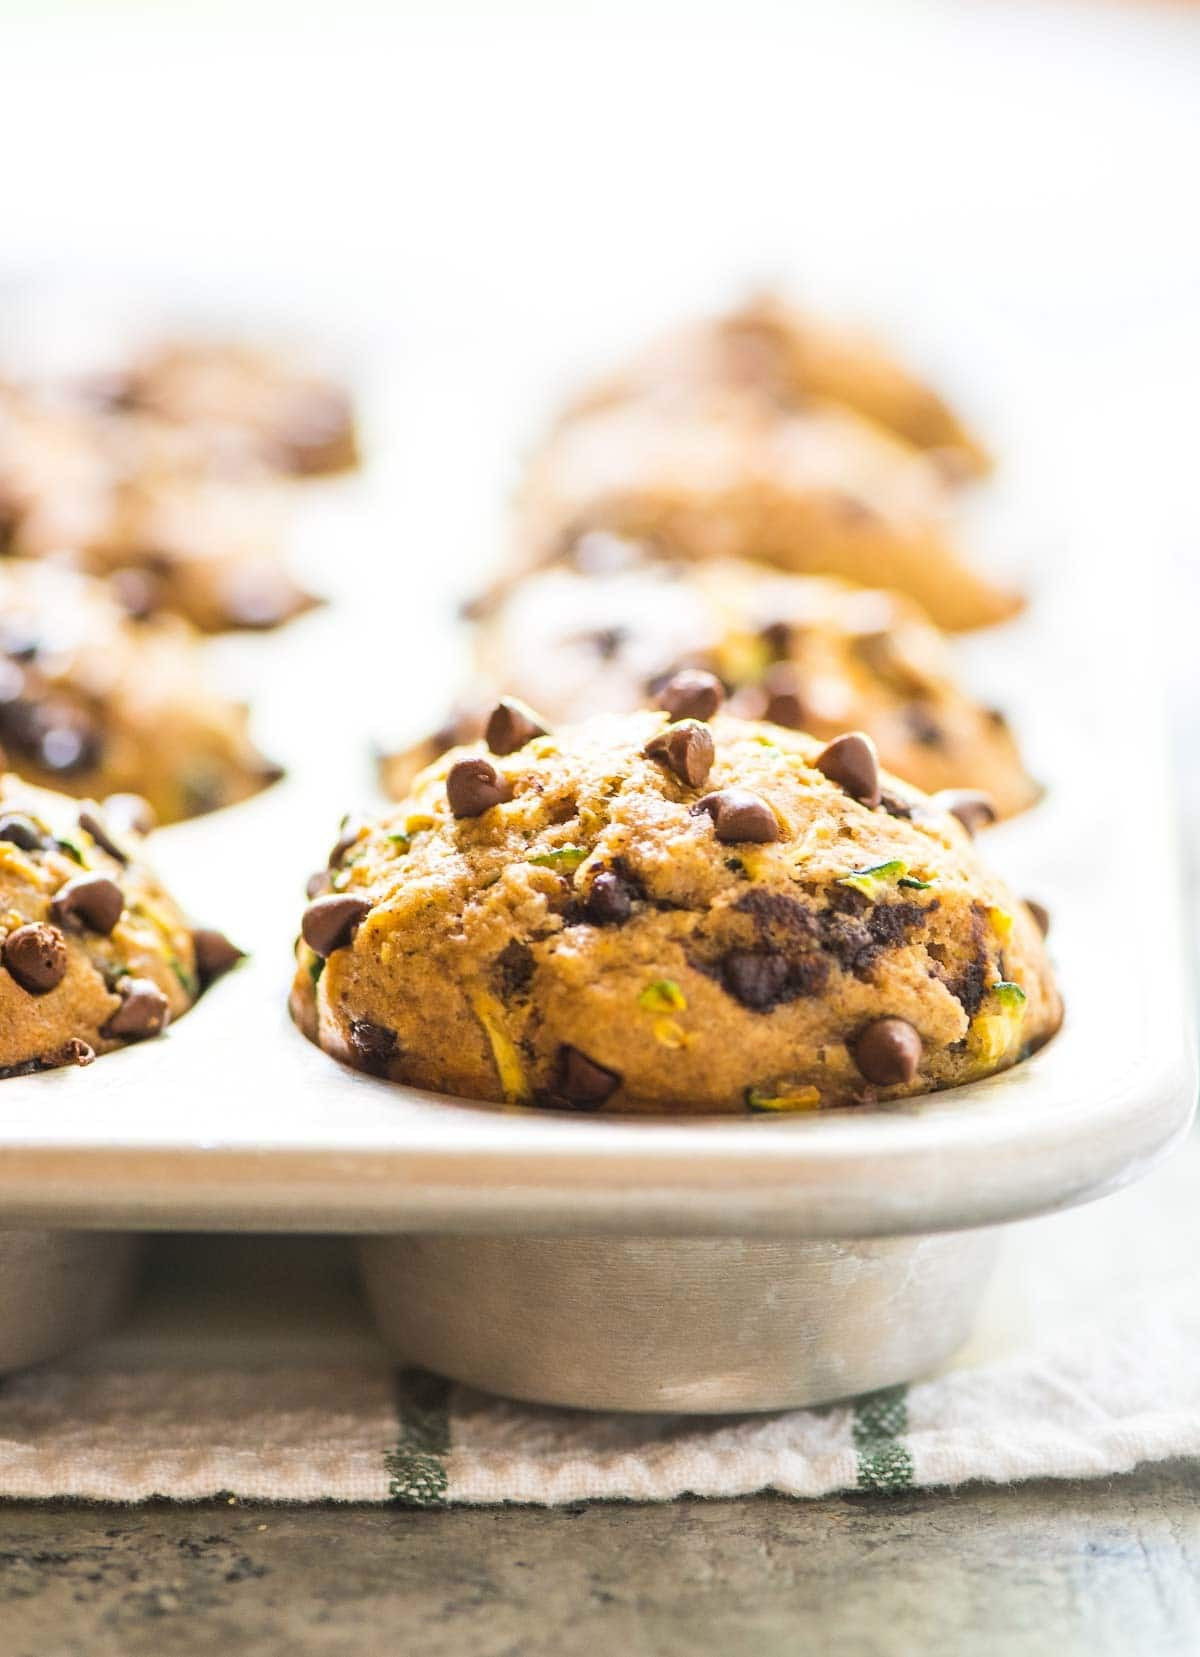 Healthy Chocolate Chip Zucchini Muffins the top 20 Ideas About Healthy Zucchini Muffins with Chocolate Chips